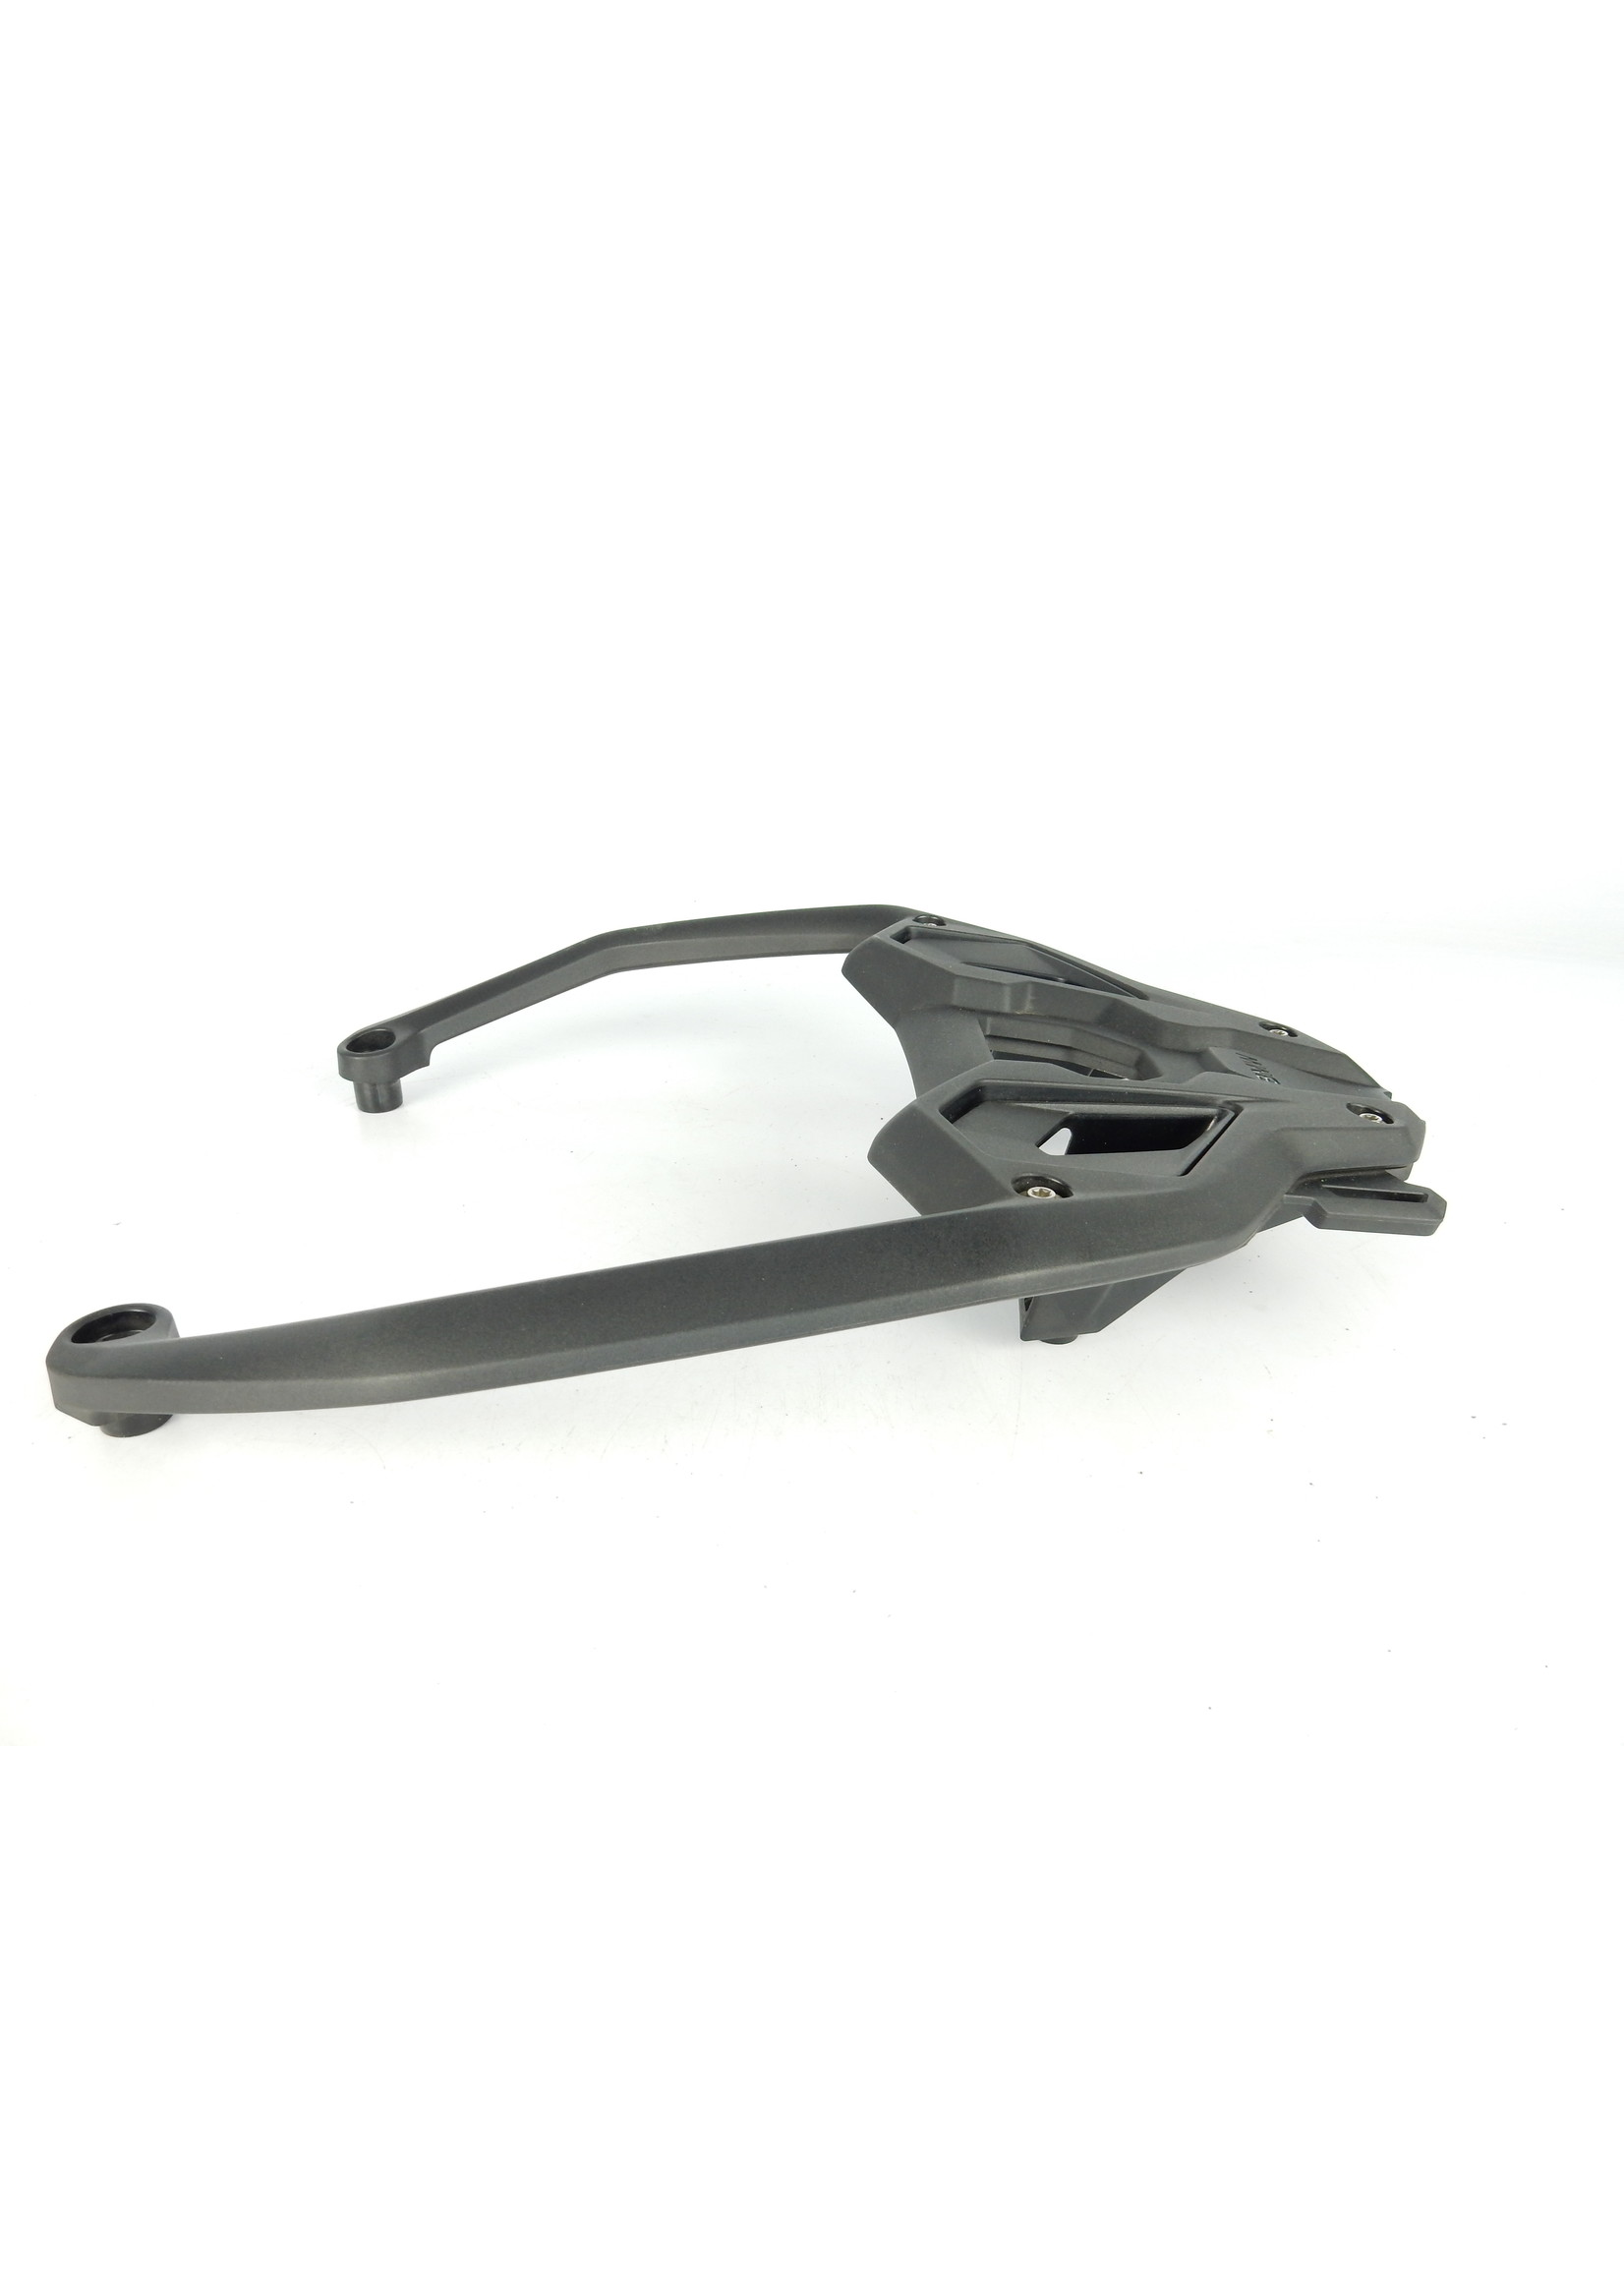 BMW BMW F 750 GS Luggage bridge, upper section / Luggage rack, lower section / 46728564644 / 46728565070